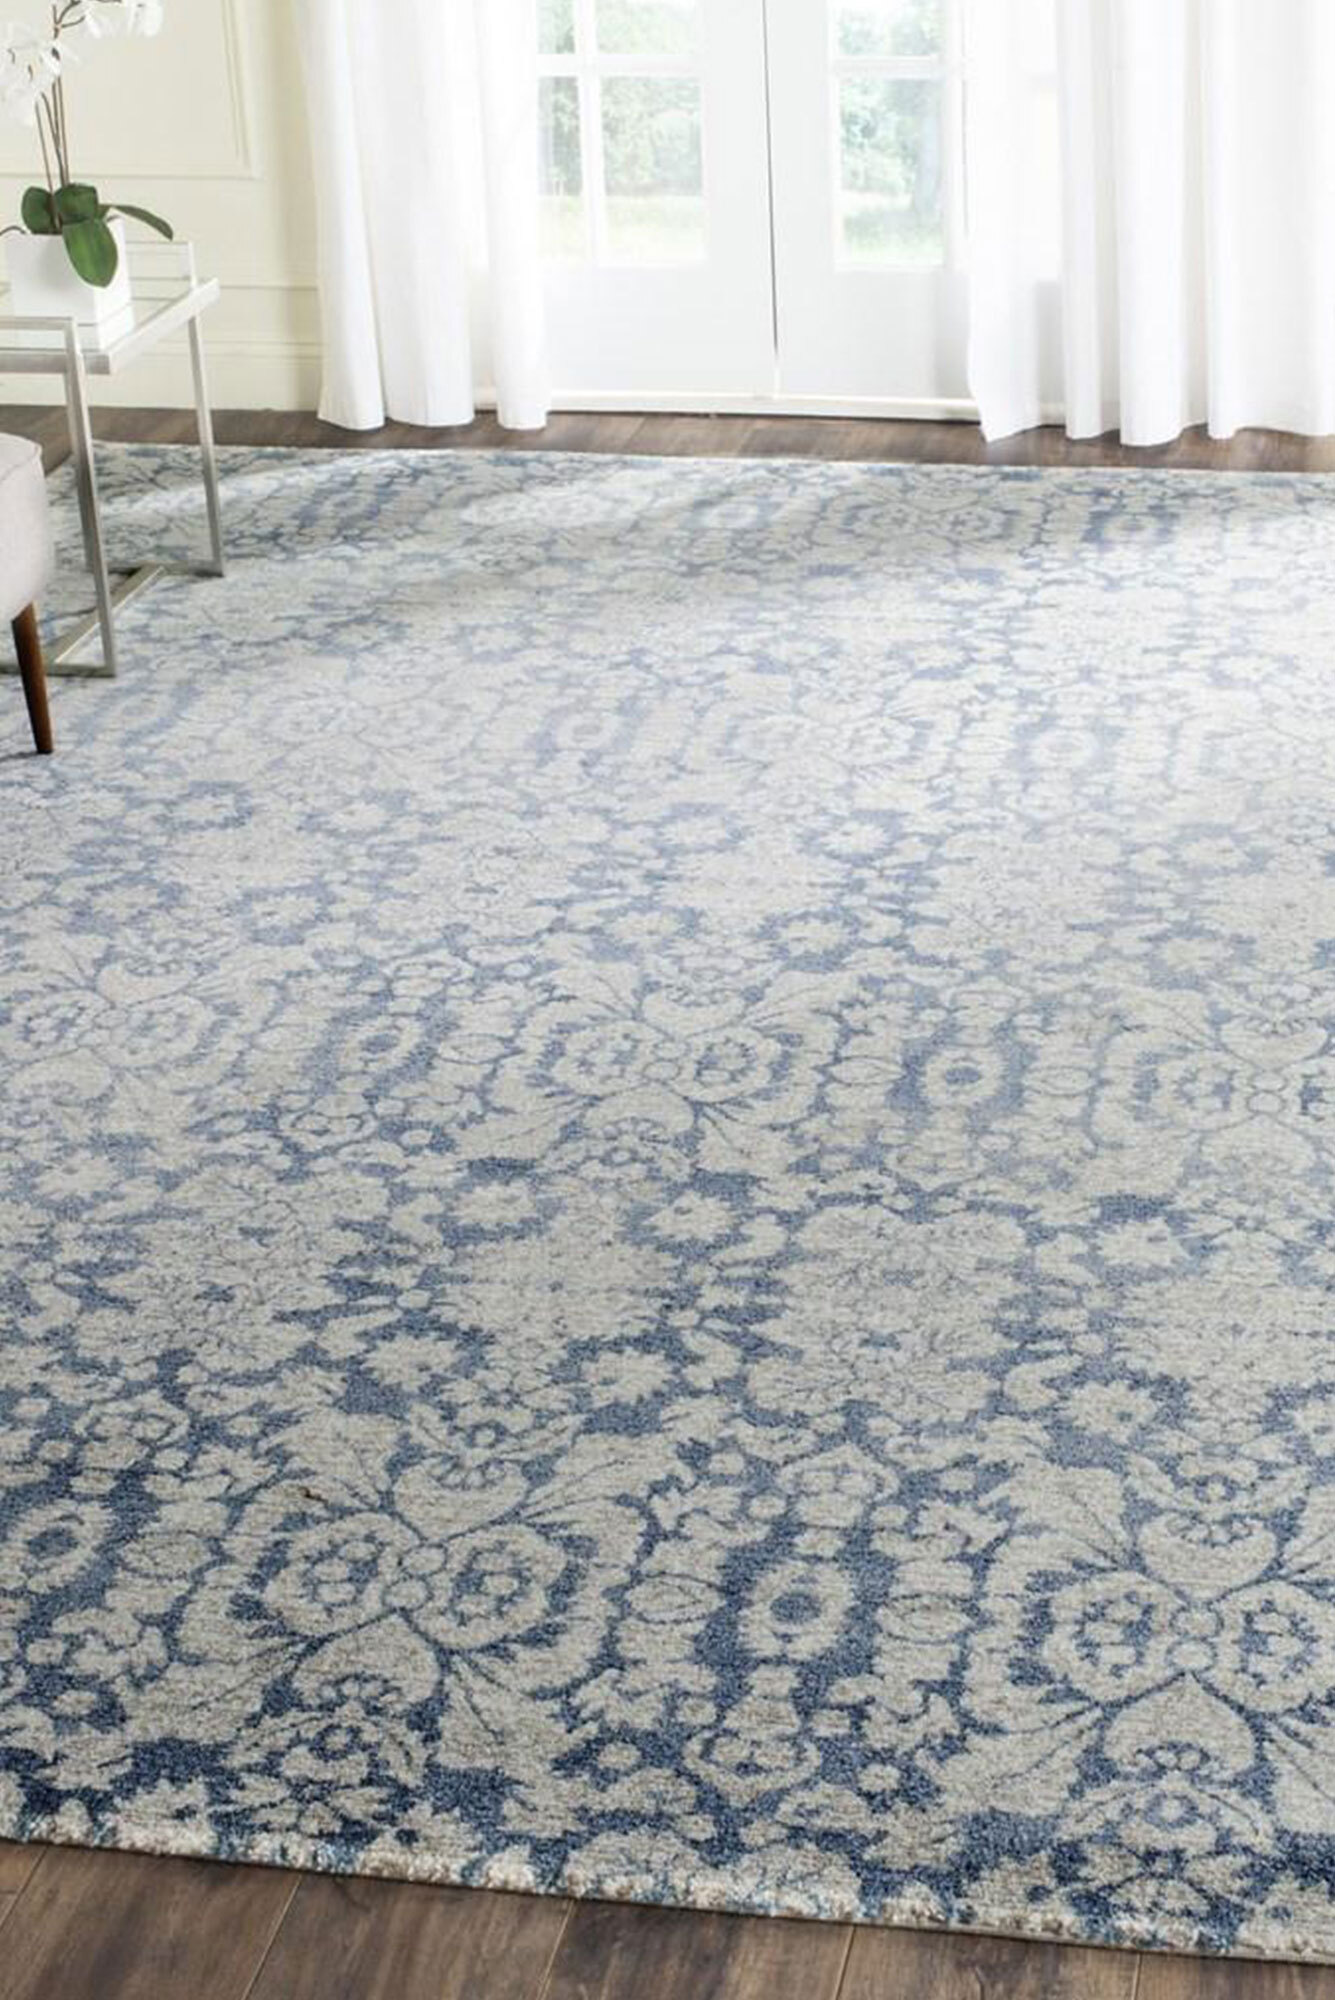 London Classic Blue Floral Rug